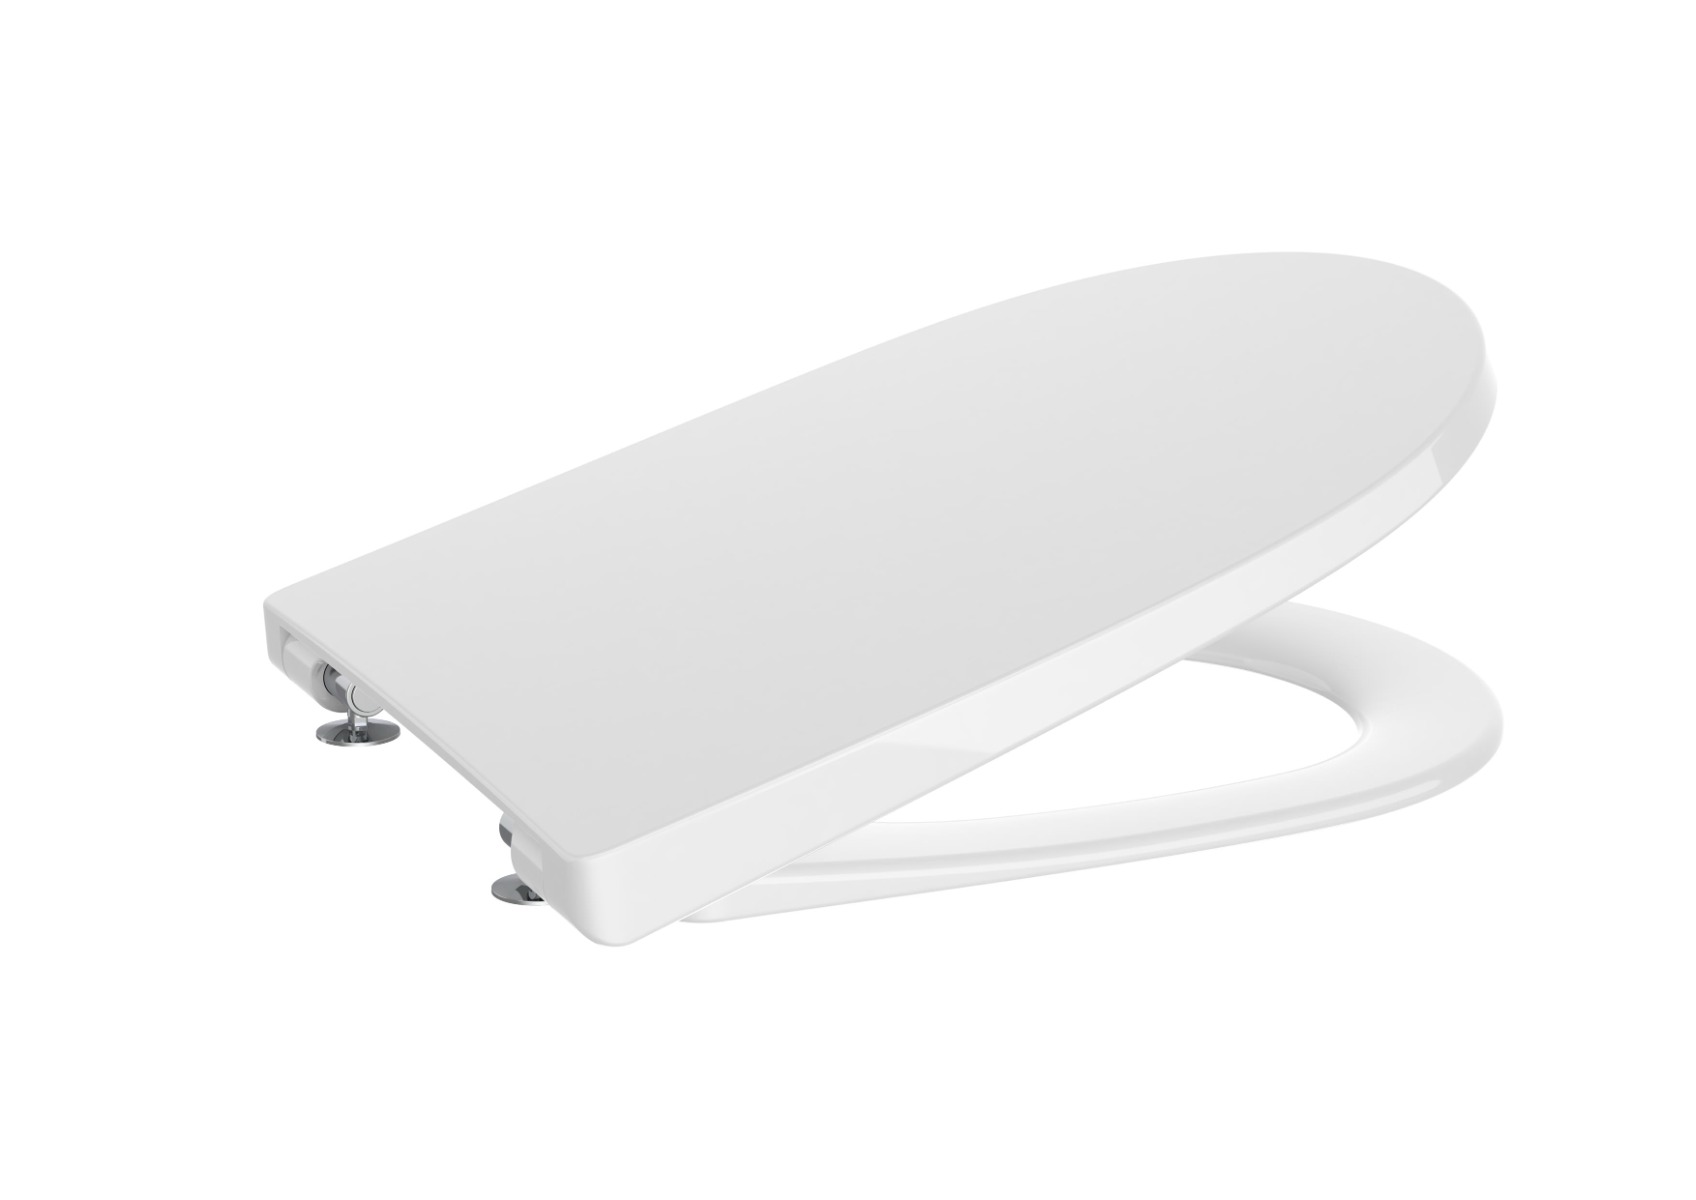 Soft-close SUPRALIT toilet seat and cover WHITE